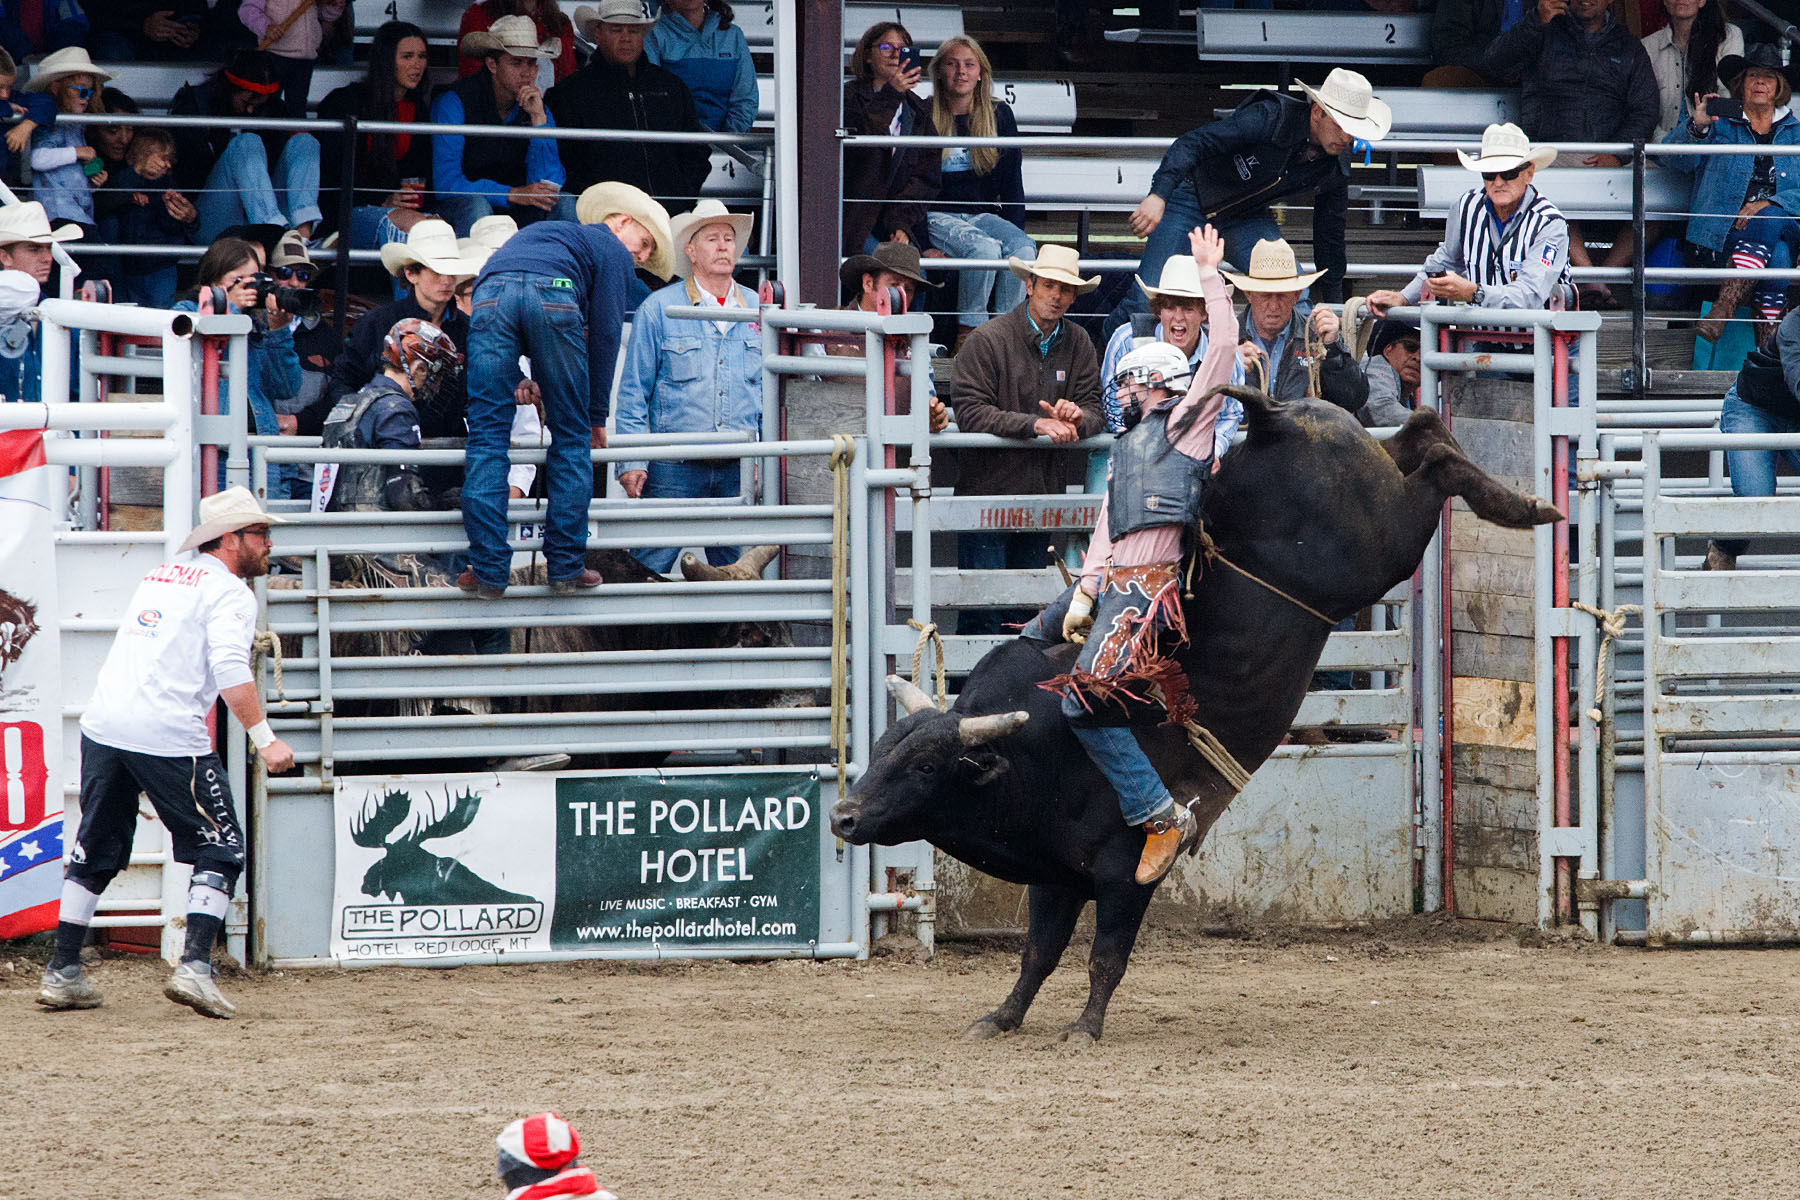 Bull Riding, Home of Champions Rodeo, Red Lodge, MT.  Click for next photo.